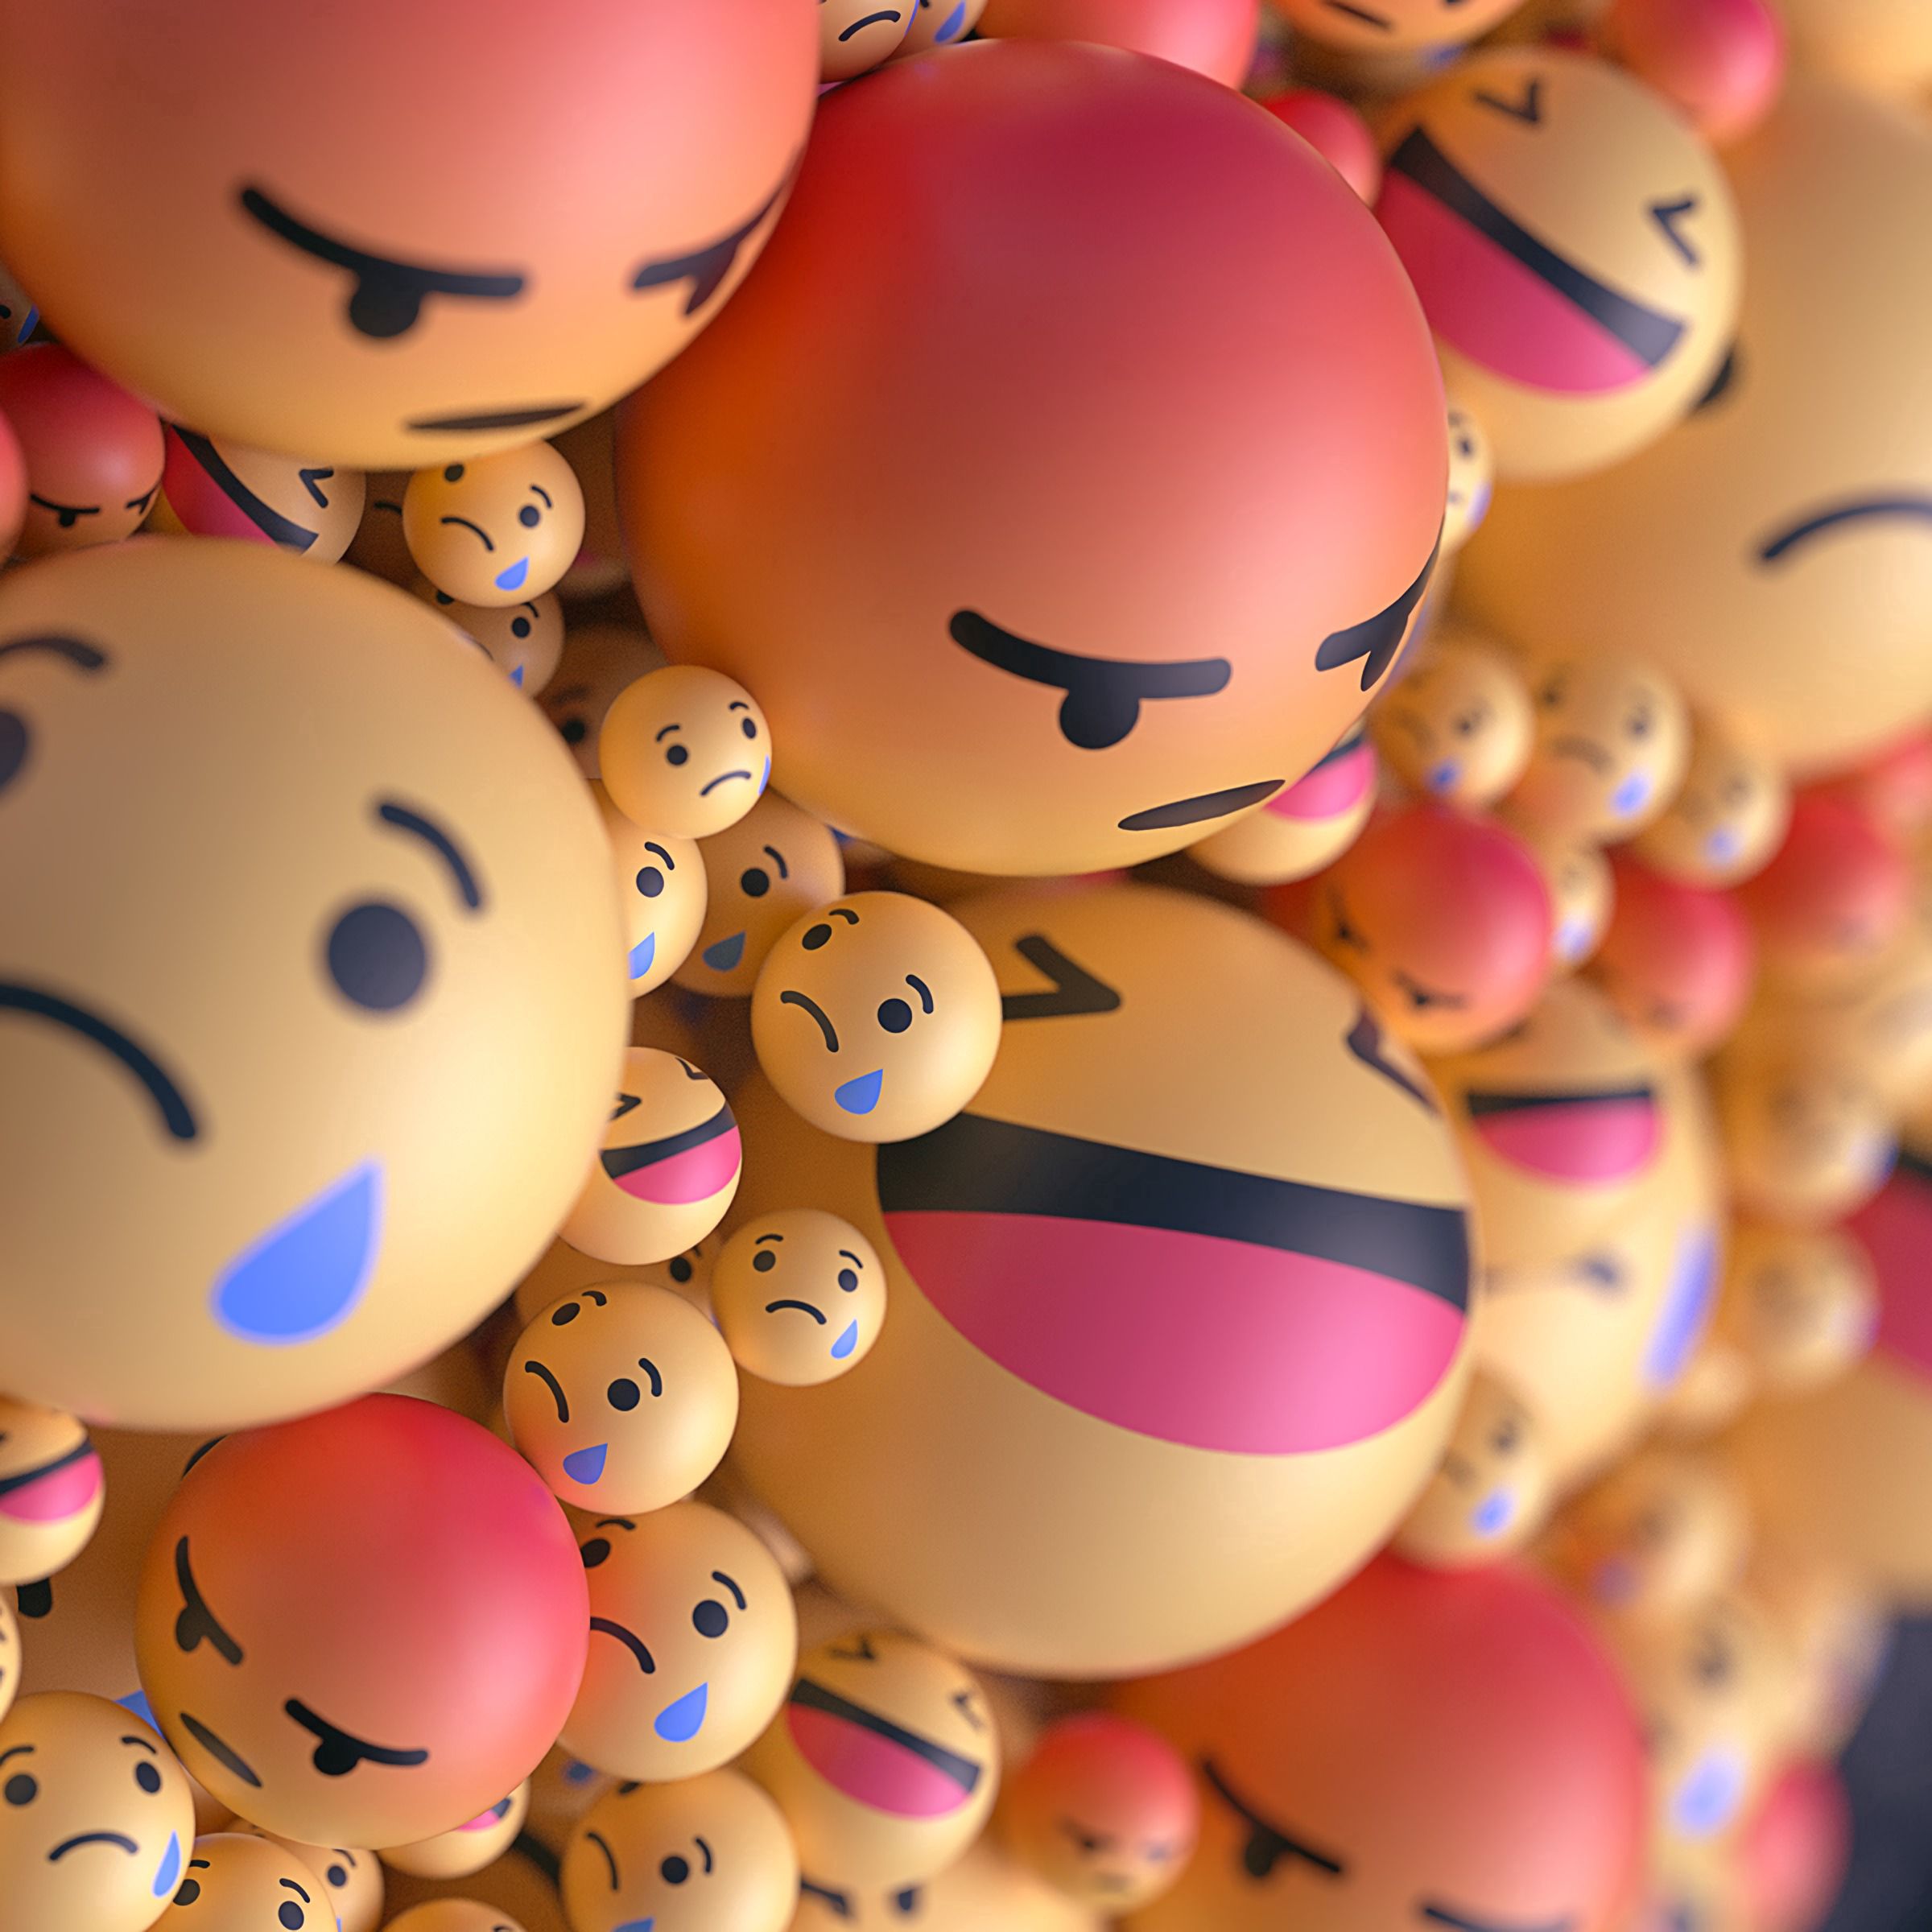 3d, smiles, emoticons, smileys, balloons, taw, smilies, emotions